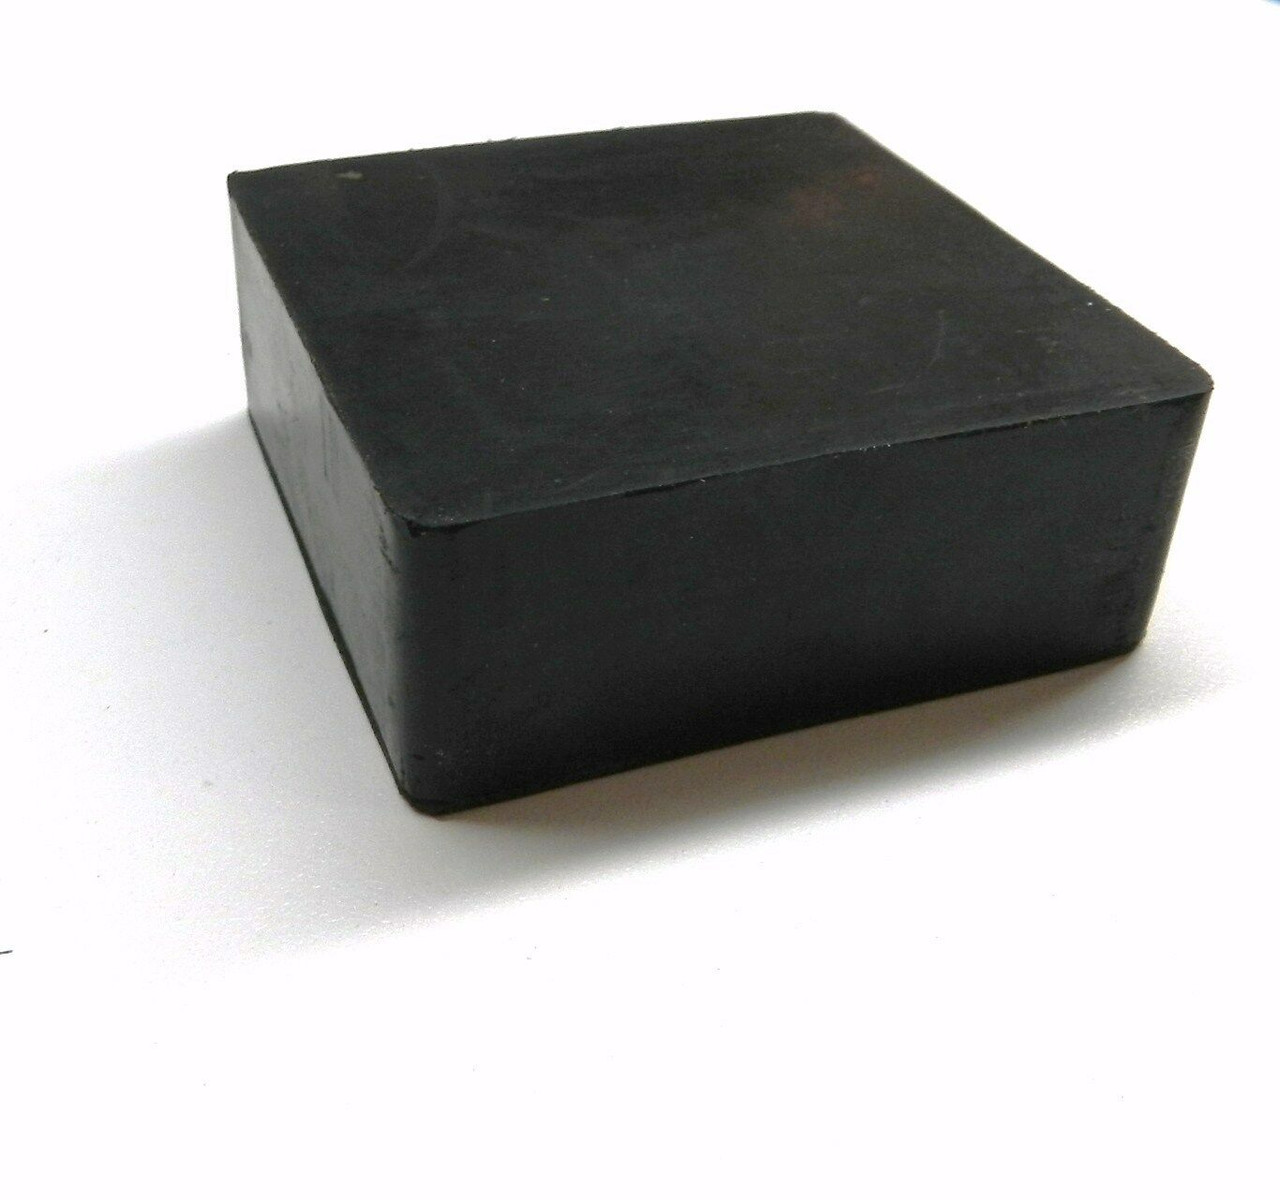 Rubber Block Bench 2 x 2 Square 1 Thick Base for Steel Block Dapping